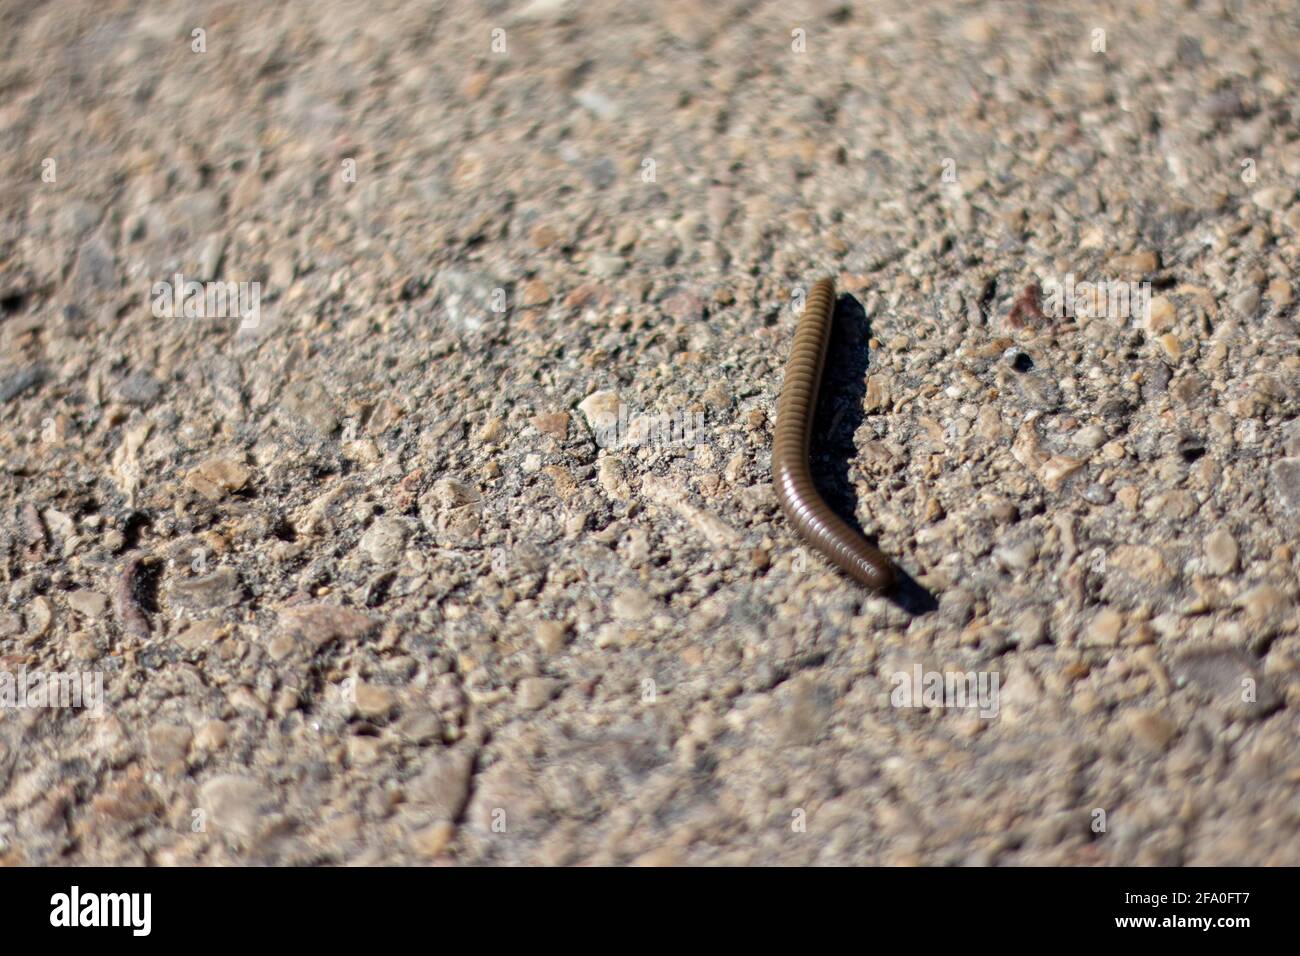 Closeup shot of a worm on the asphalt at daytime Stock Photo